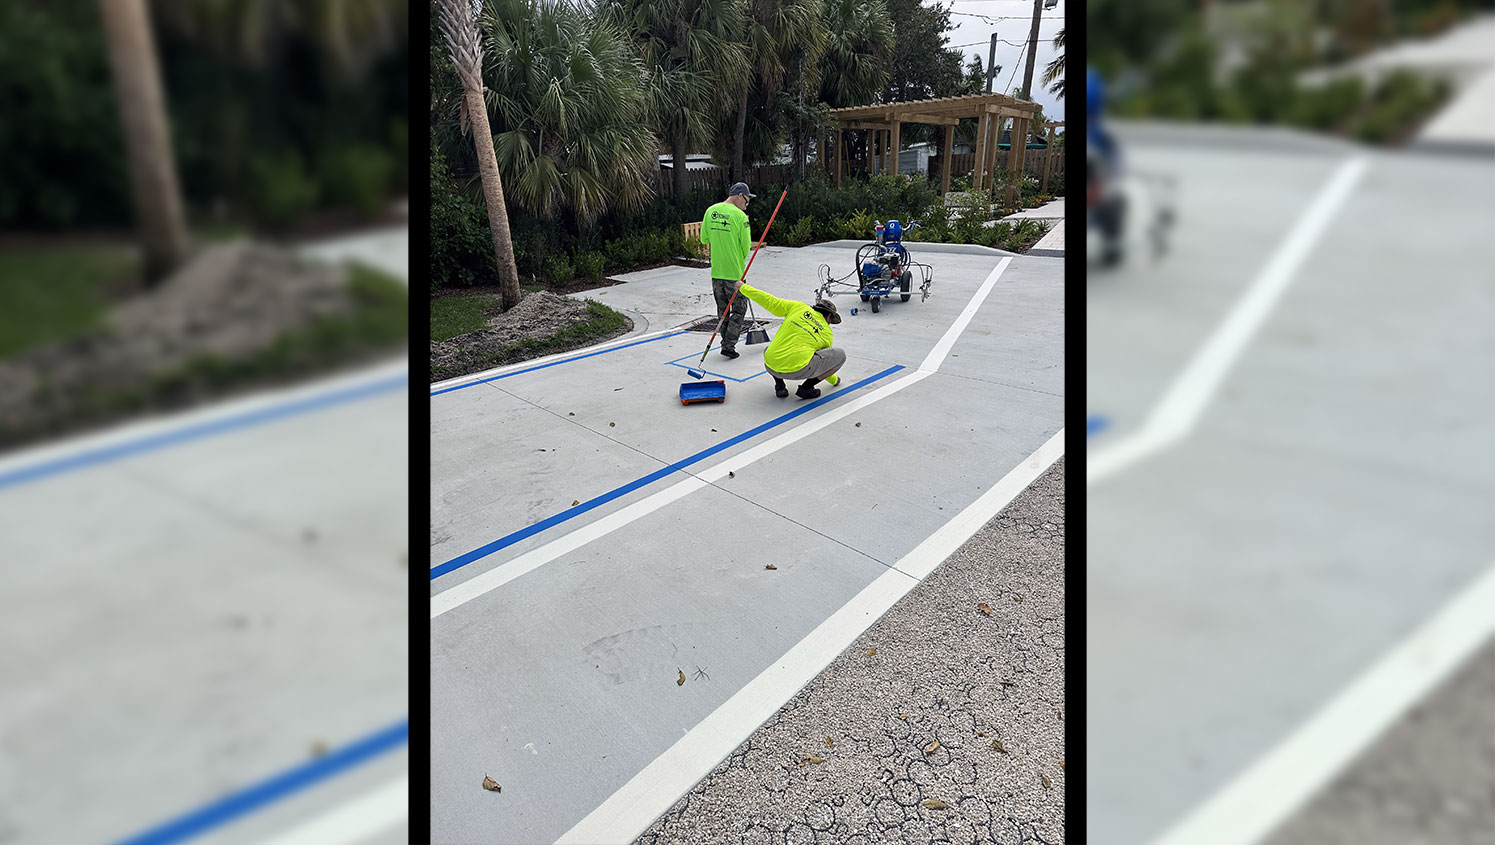 G-FORCE Palm Beach team striping handicapped-accessible parking spot